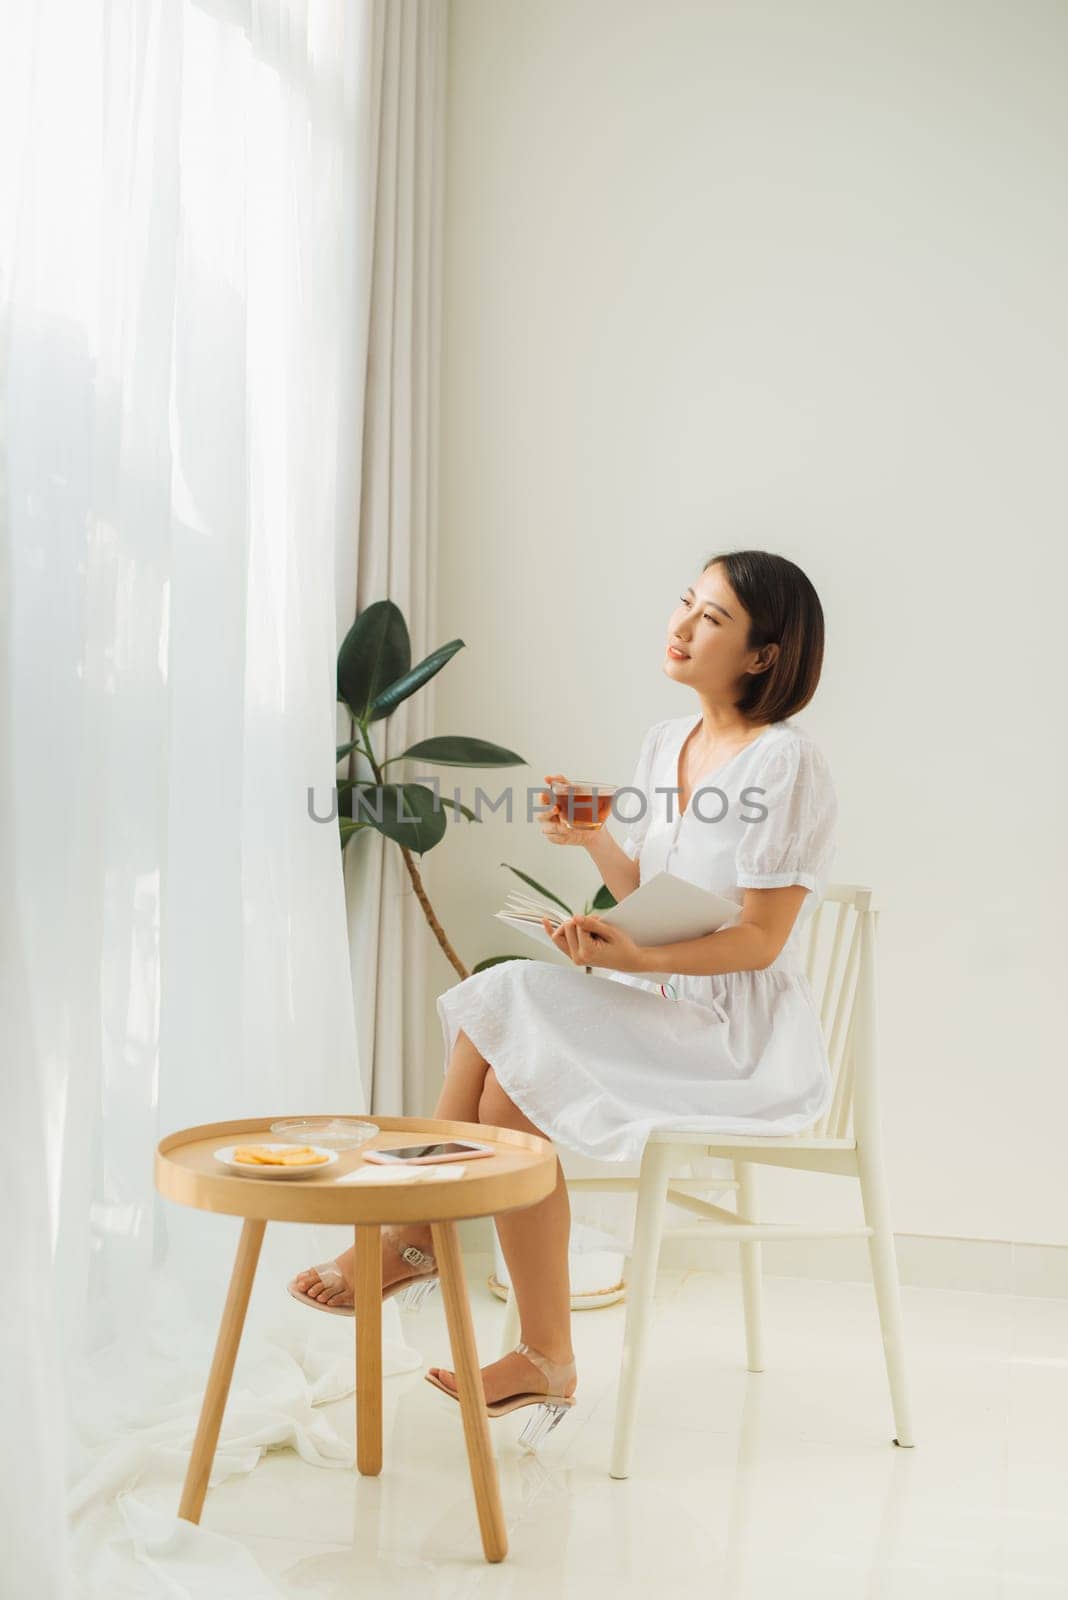 Young woman at home sitting near window relaxing in her living room reading book and drinking tea